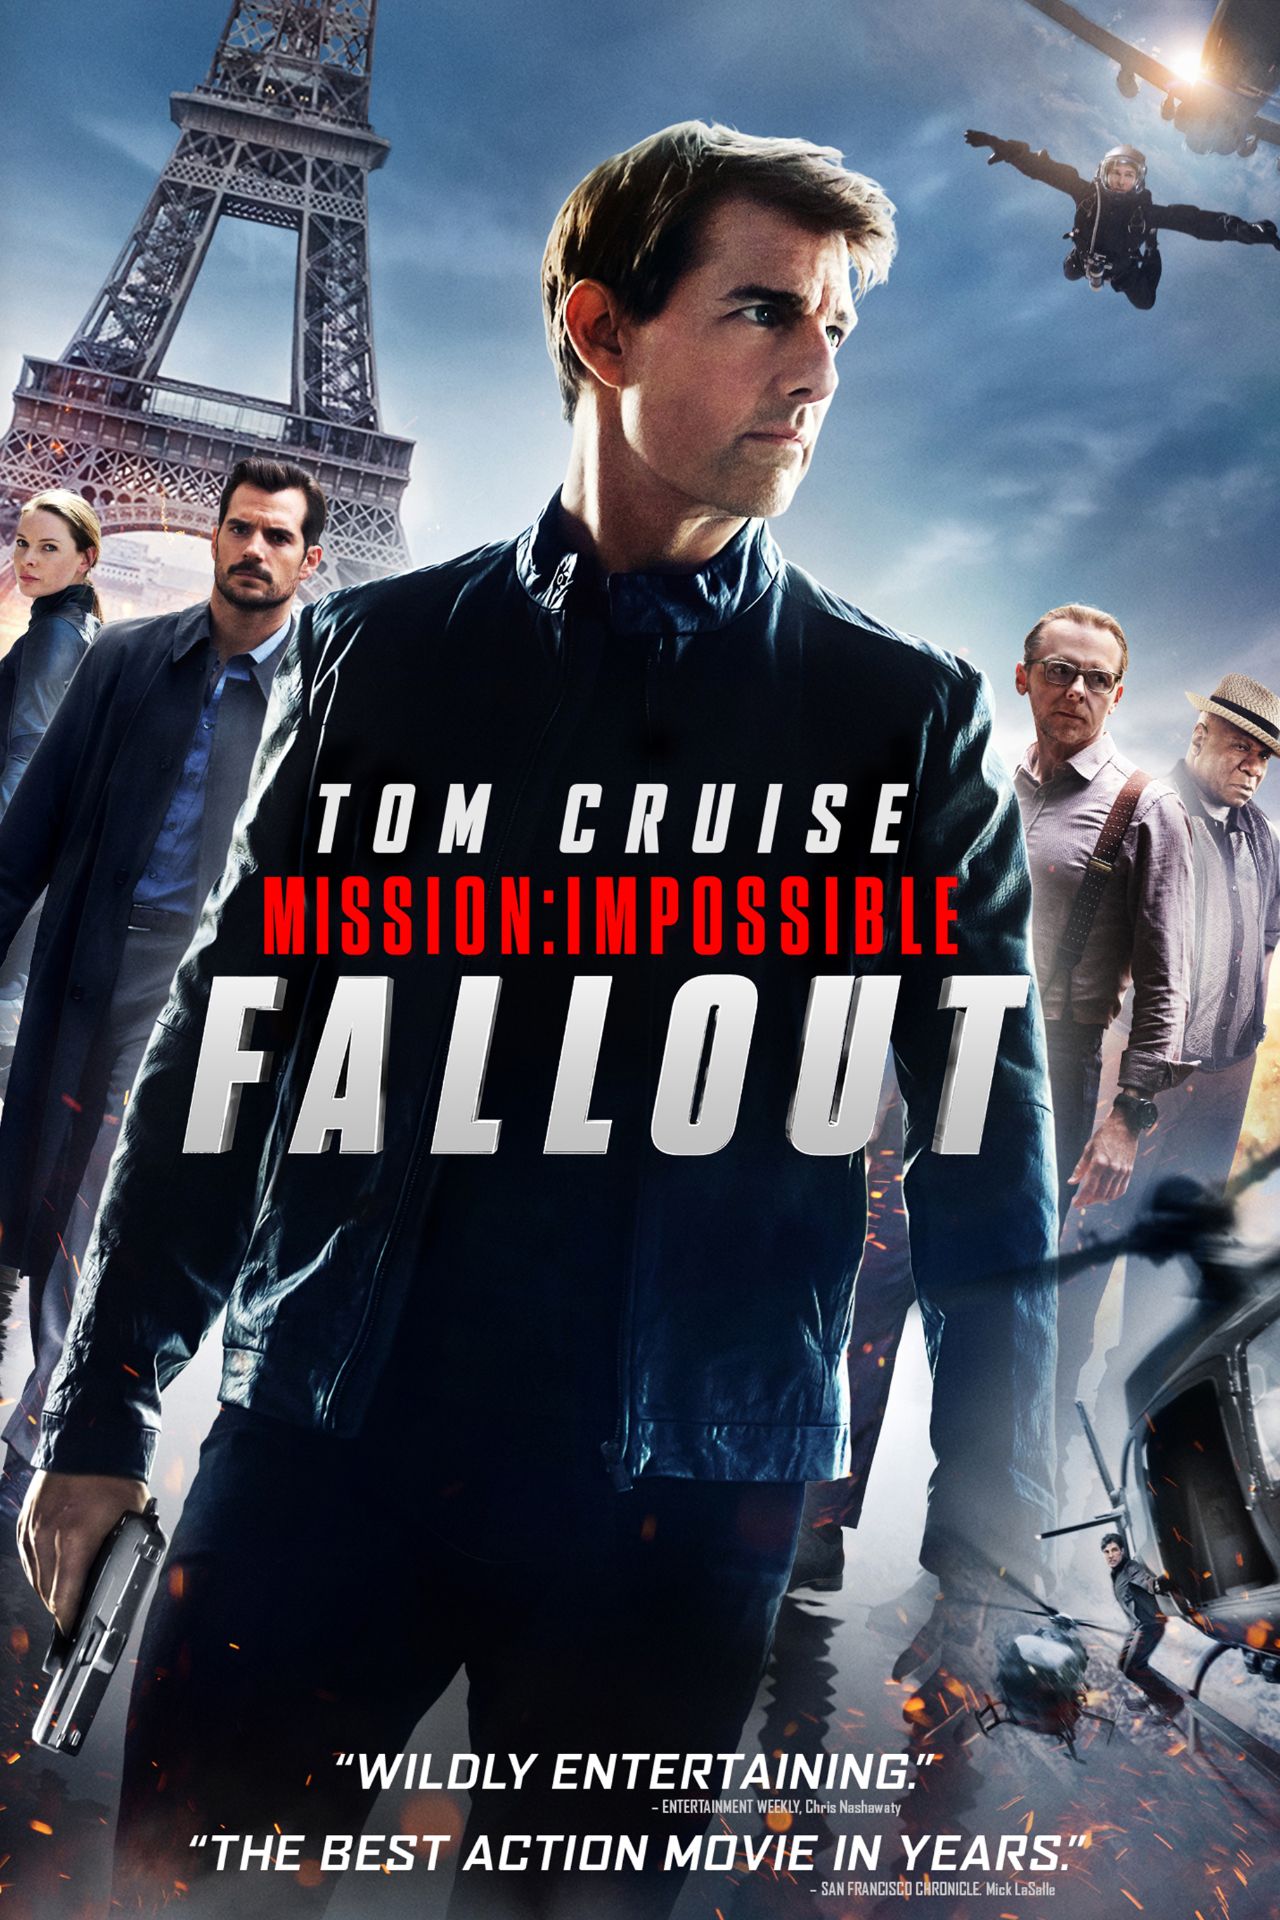 Mission Impossible Fallout Movie Poster